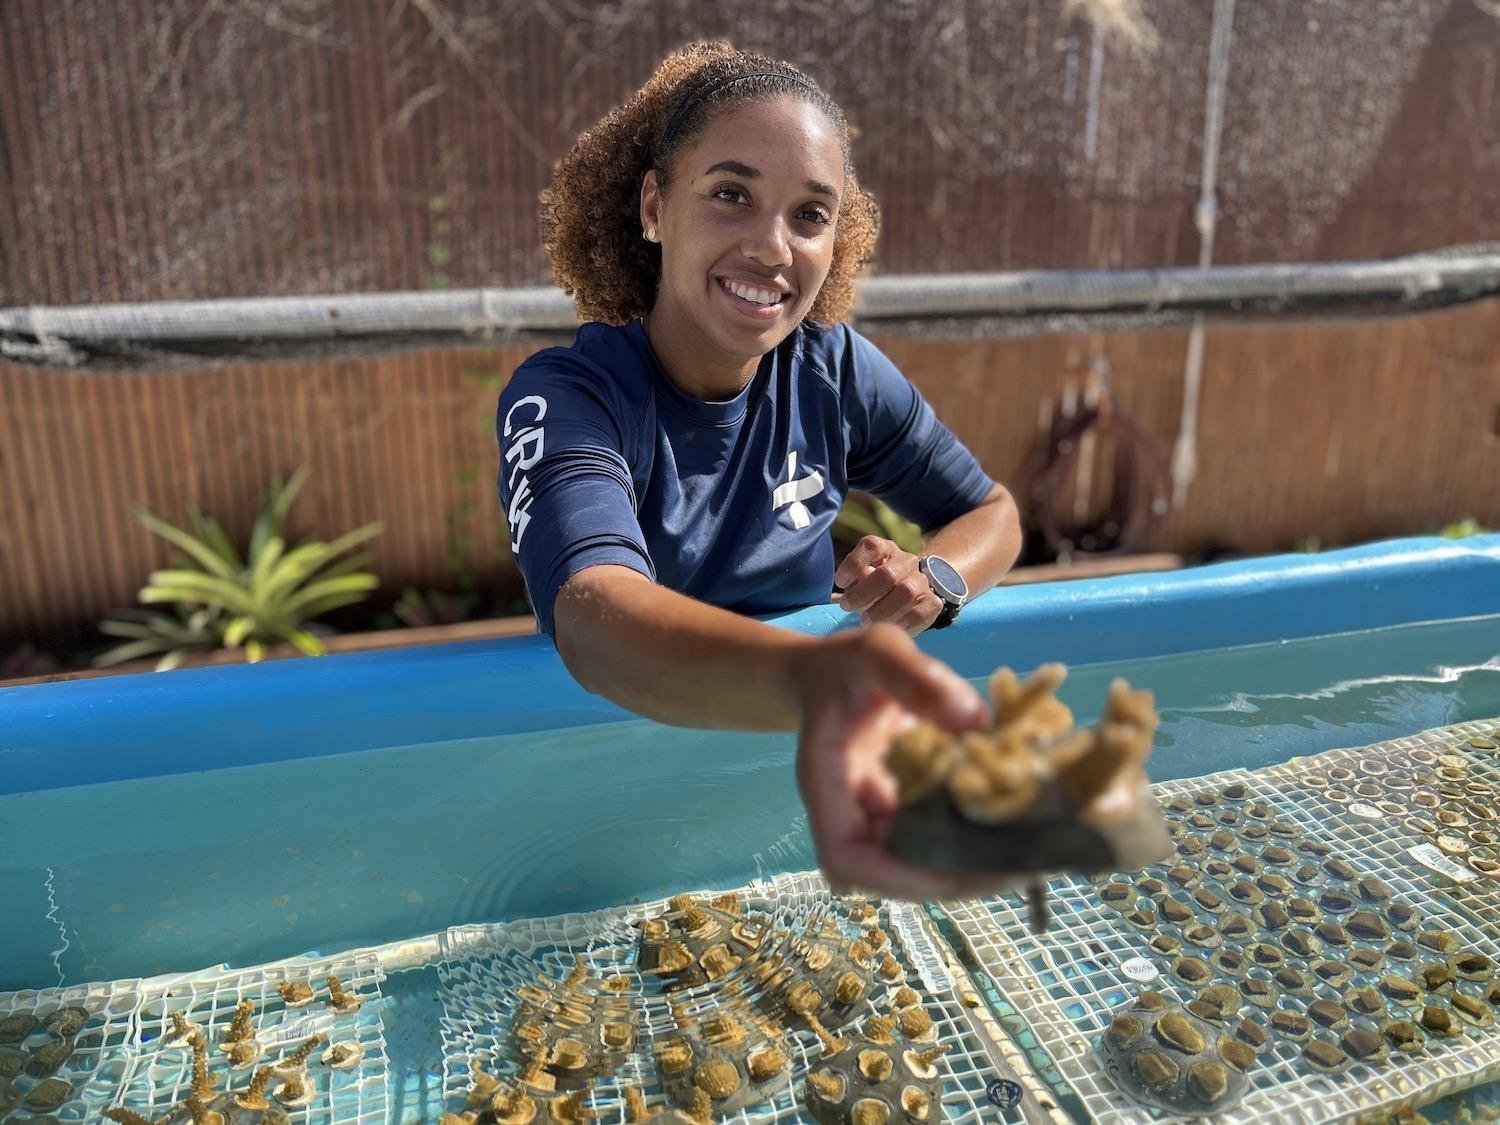 On a tour of Coral Vita, restoration specialist Allanah Vellacott shows how the land-based commercial coral farm works.